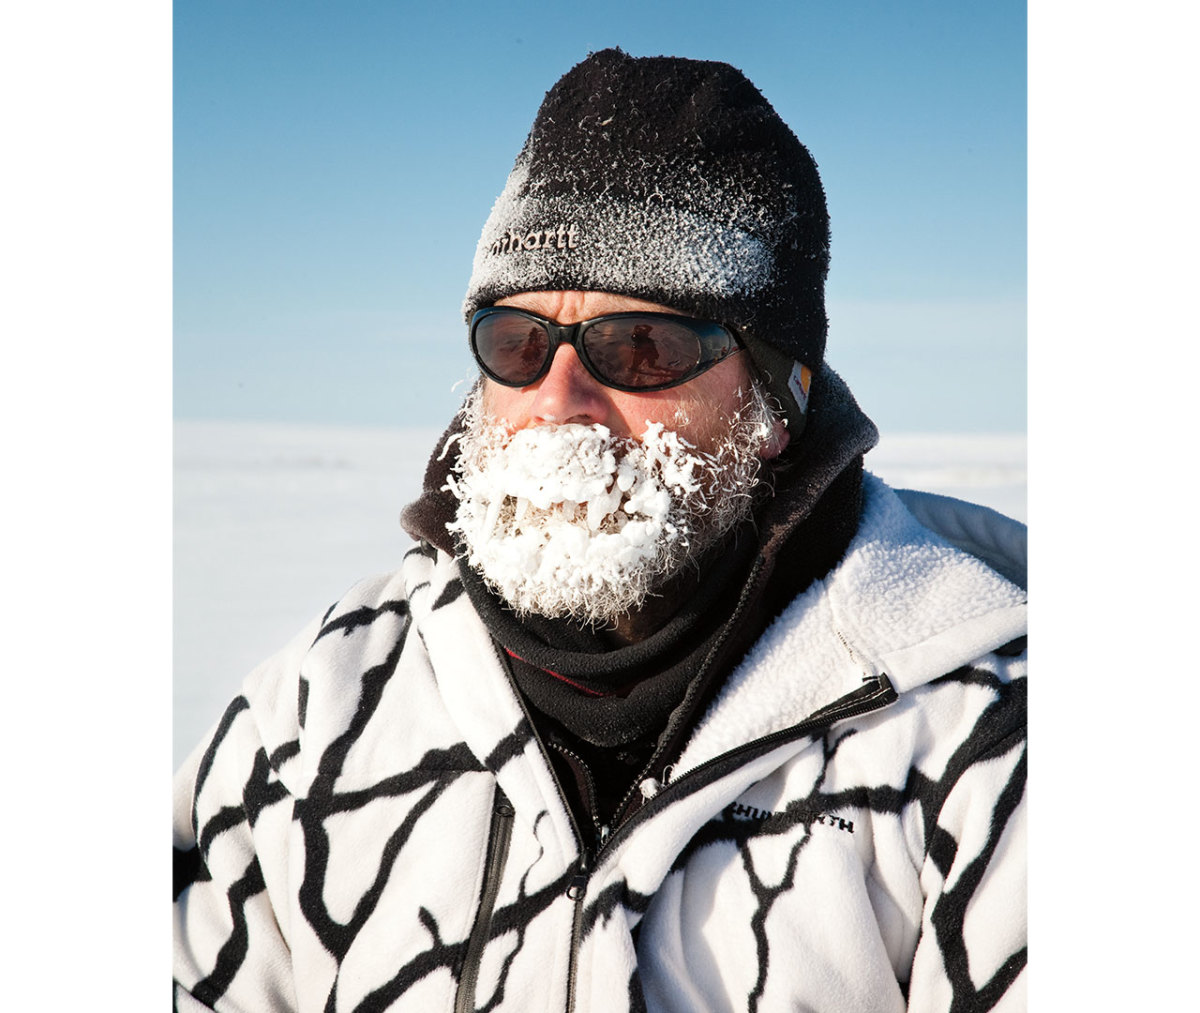 Older caucasian man wearin black banie and sunglasses with white and black fleece and beard covered in ice